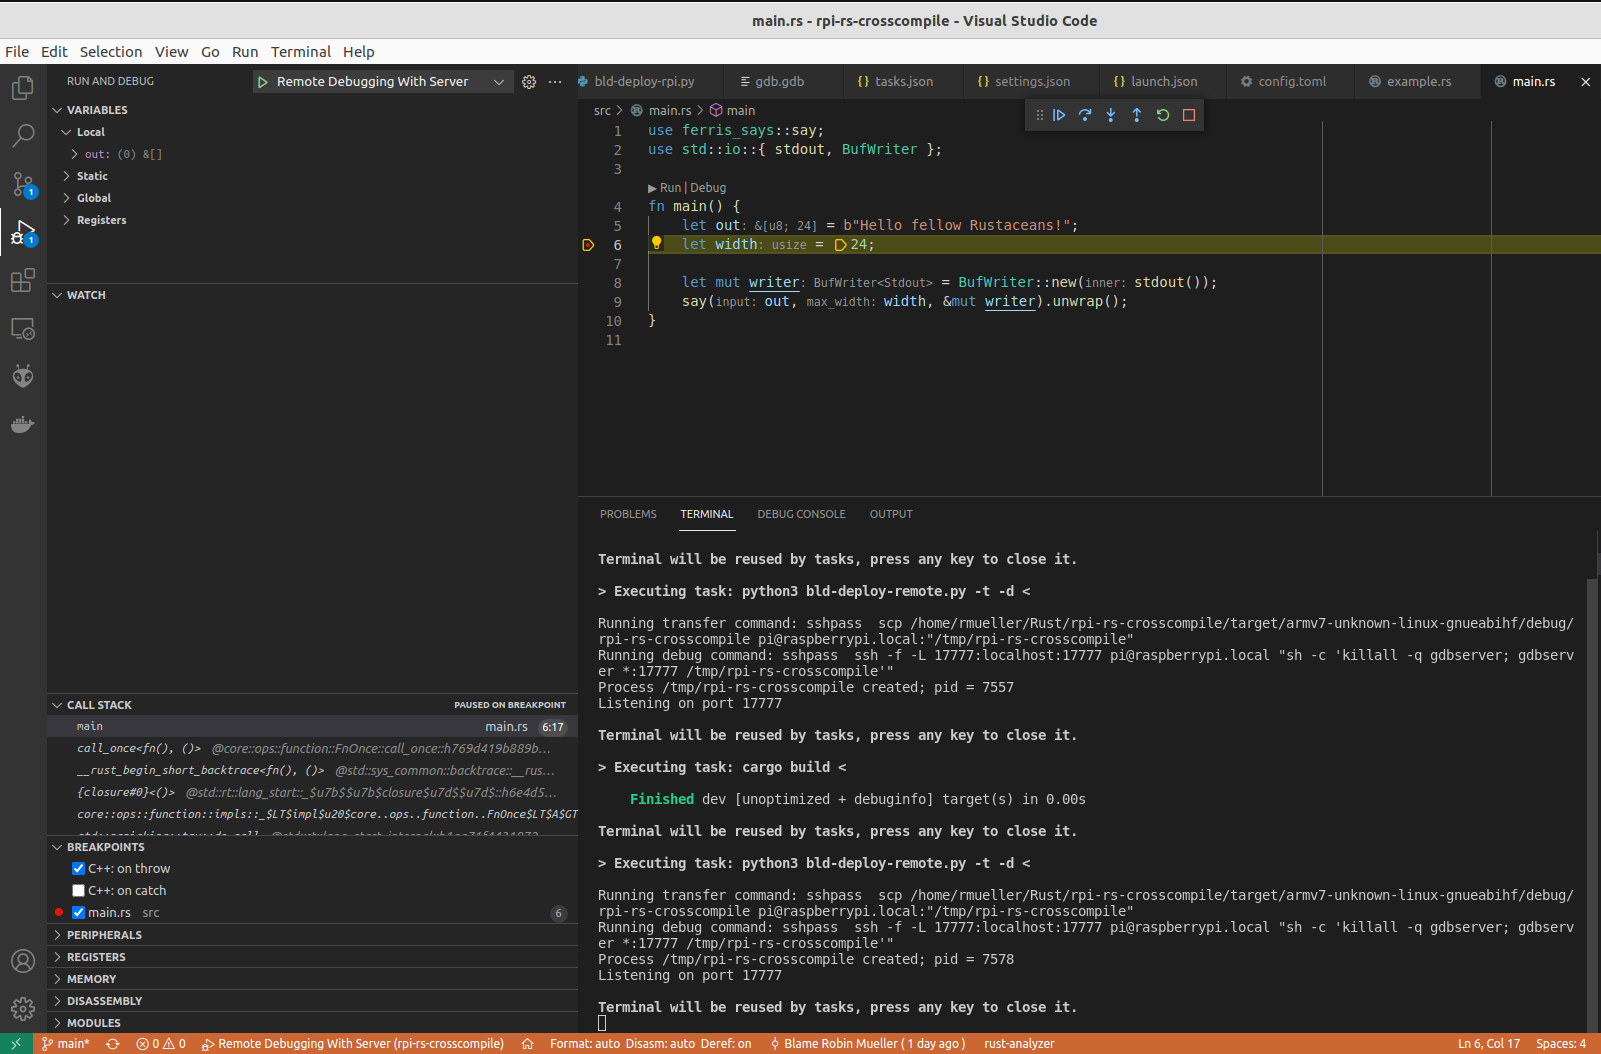 Debugging with VS Code with GDB Server started by VS Code